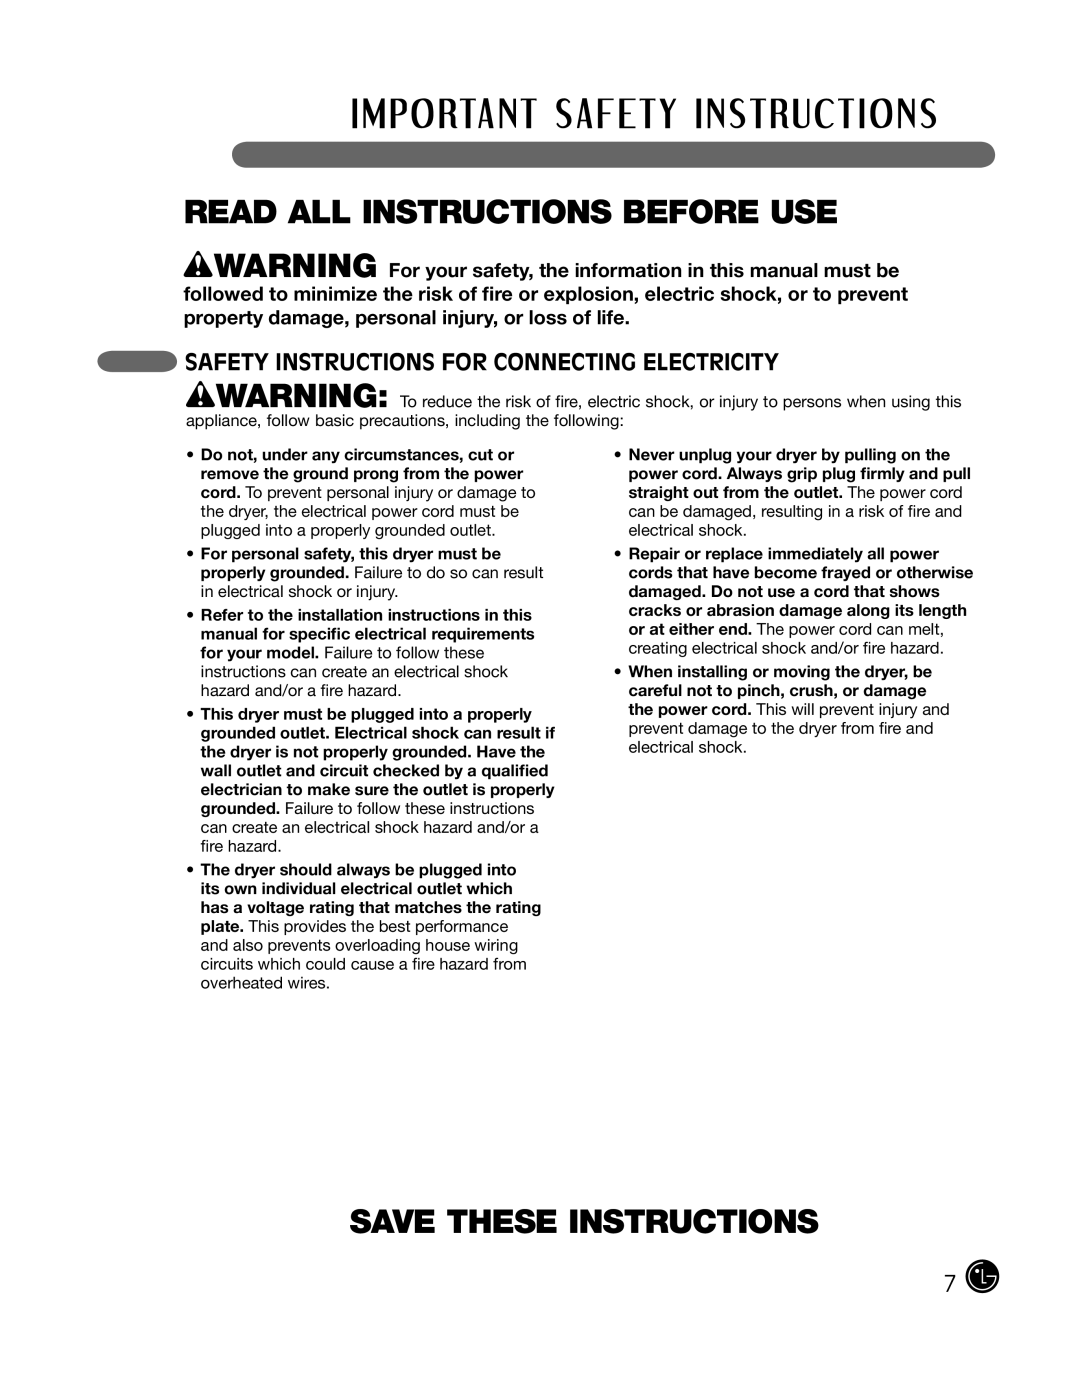 LG Electronics P154 manual Save These Instructions, Safety Instructions For Connecting Electricity 